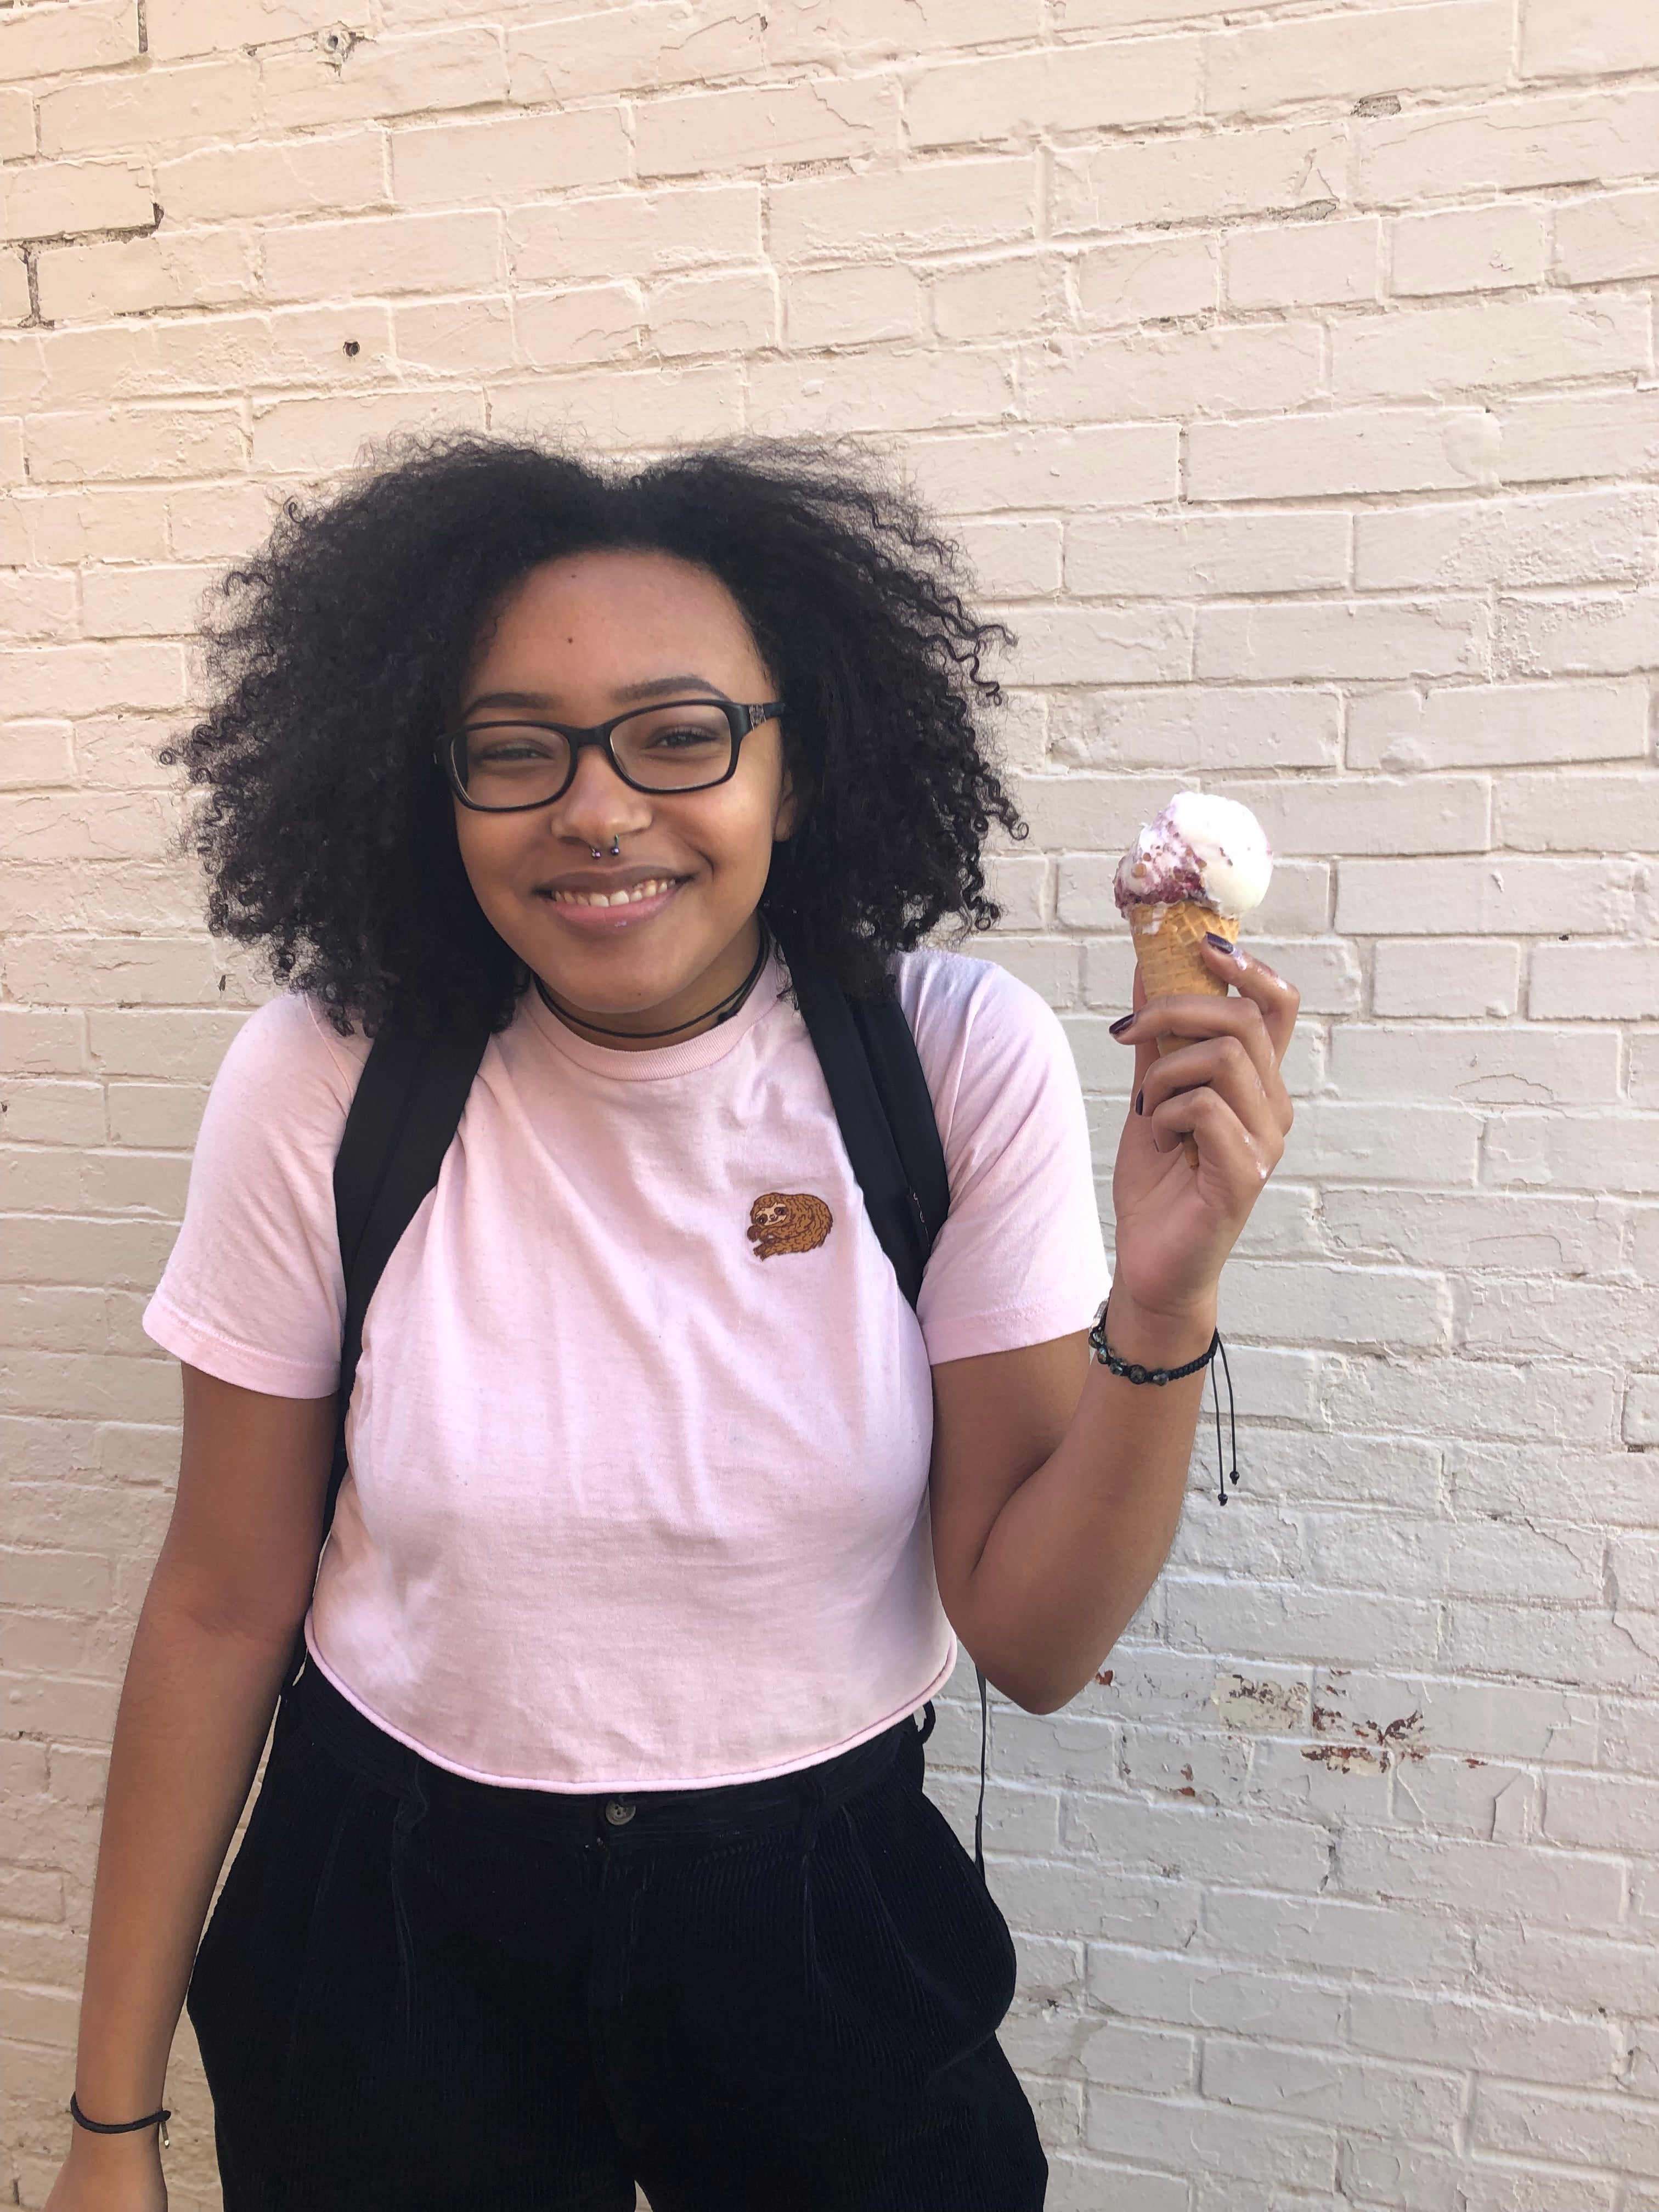 Imani smiling with an ice cream in her hand, a pink crop top, and black pants, standing against a light yellow brick wall.